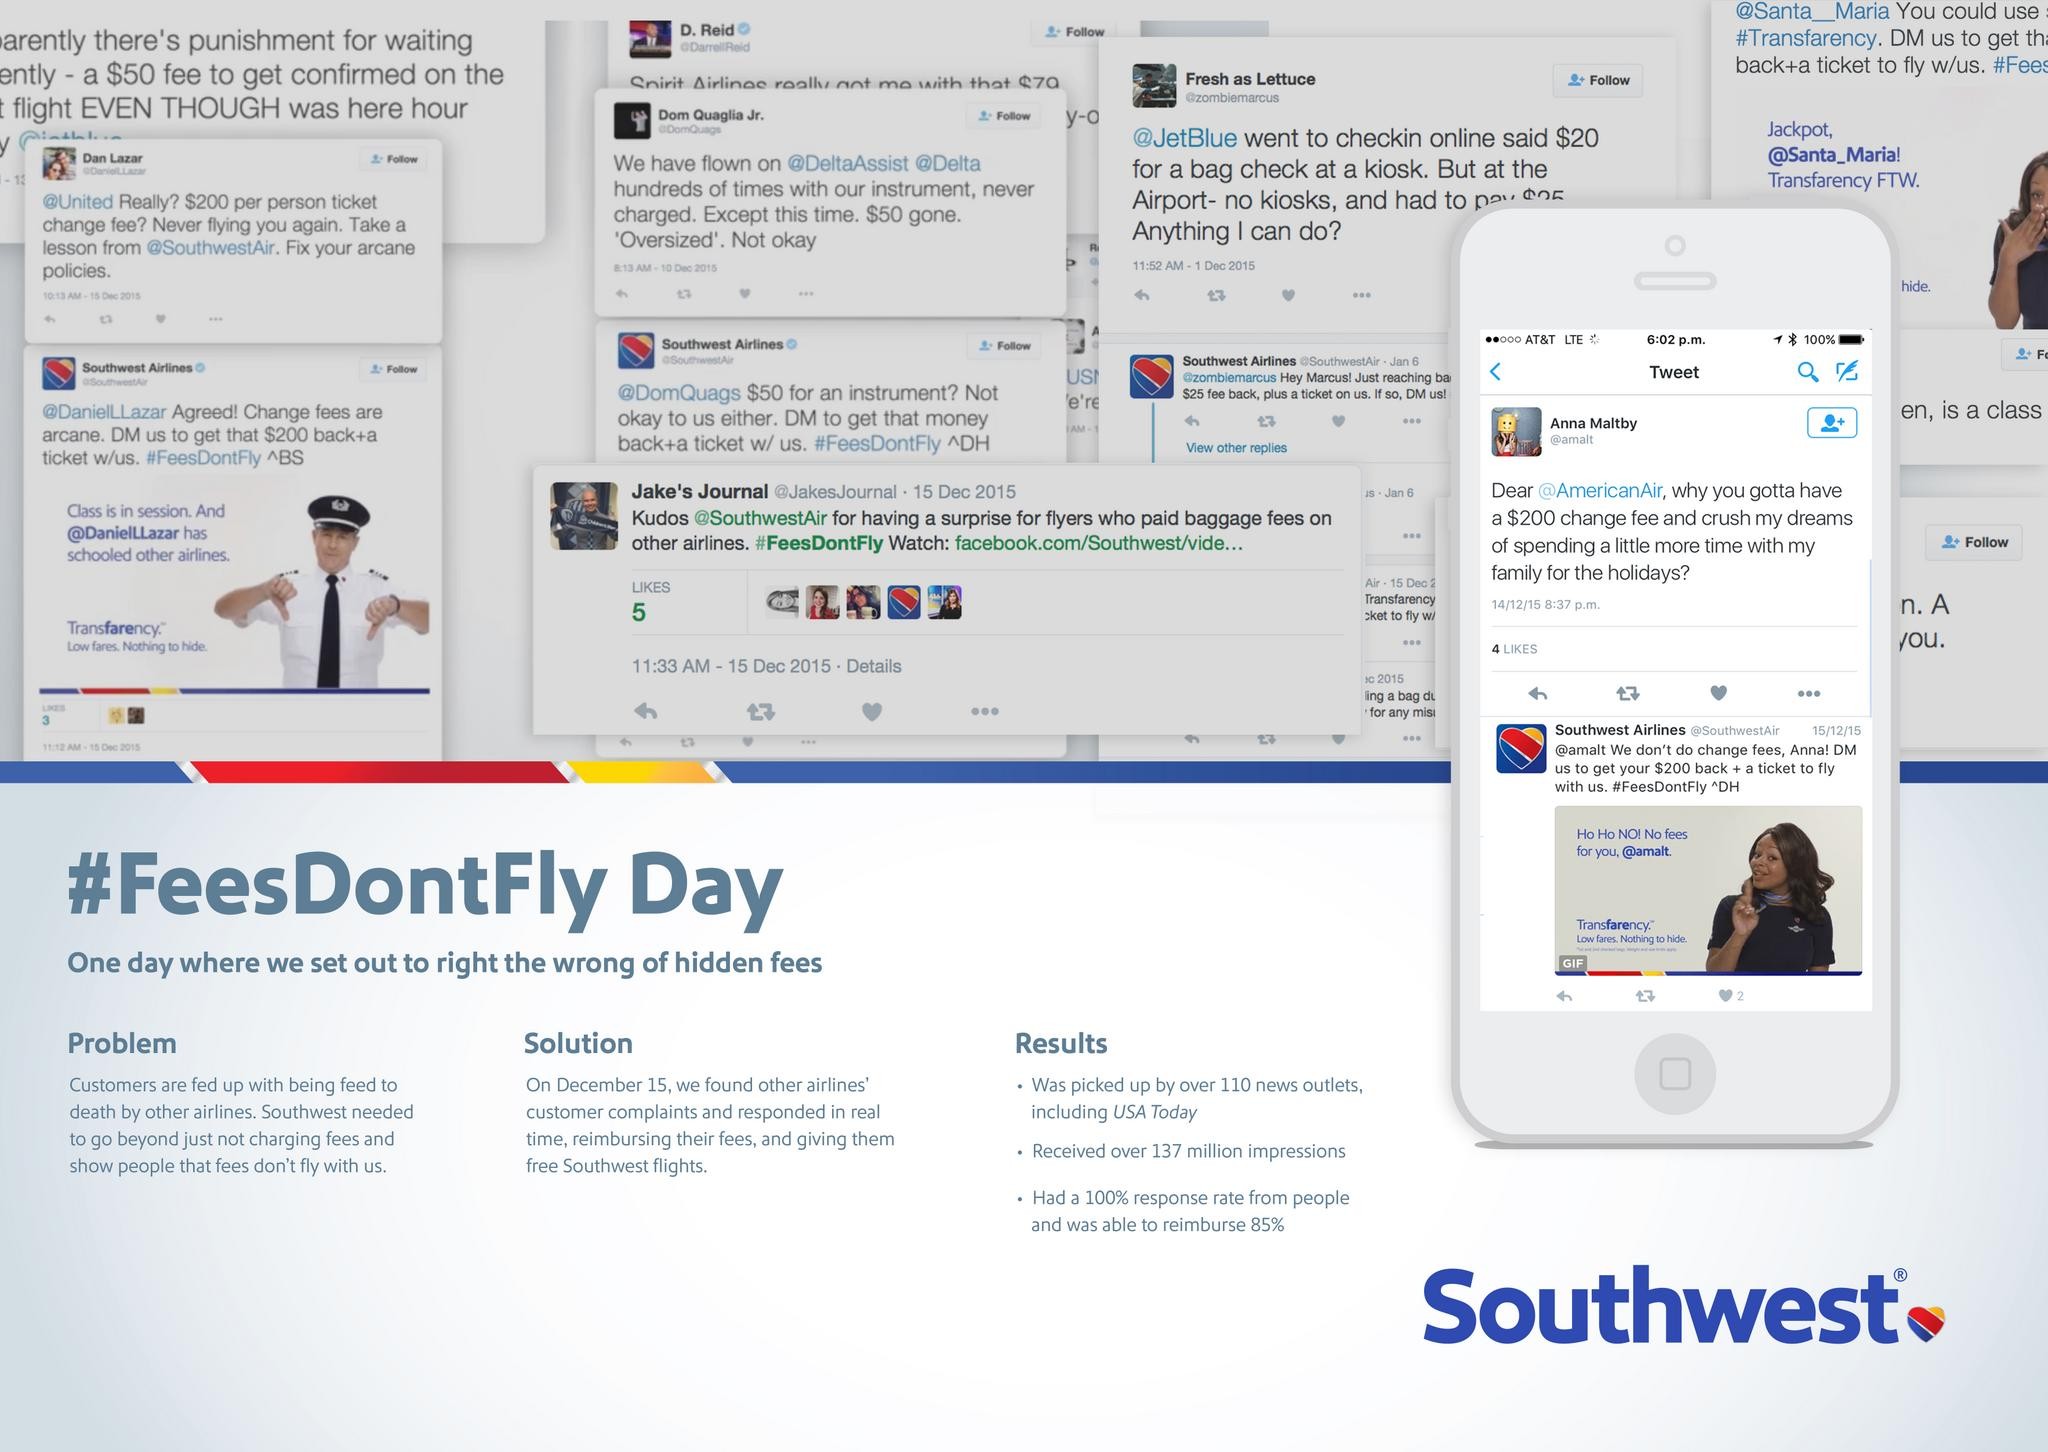 Southwest Airlines - #FeesDontFly Day